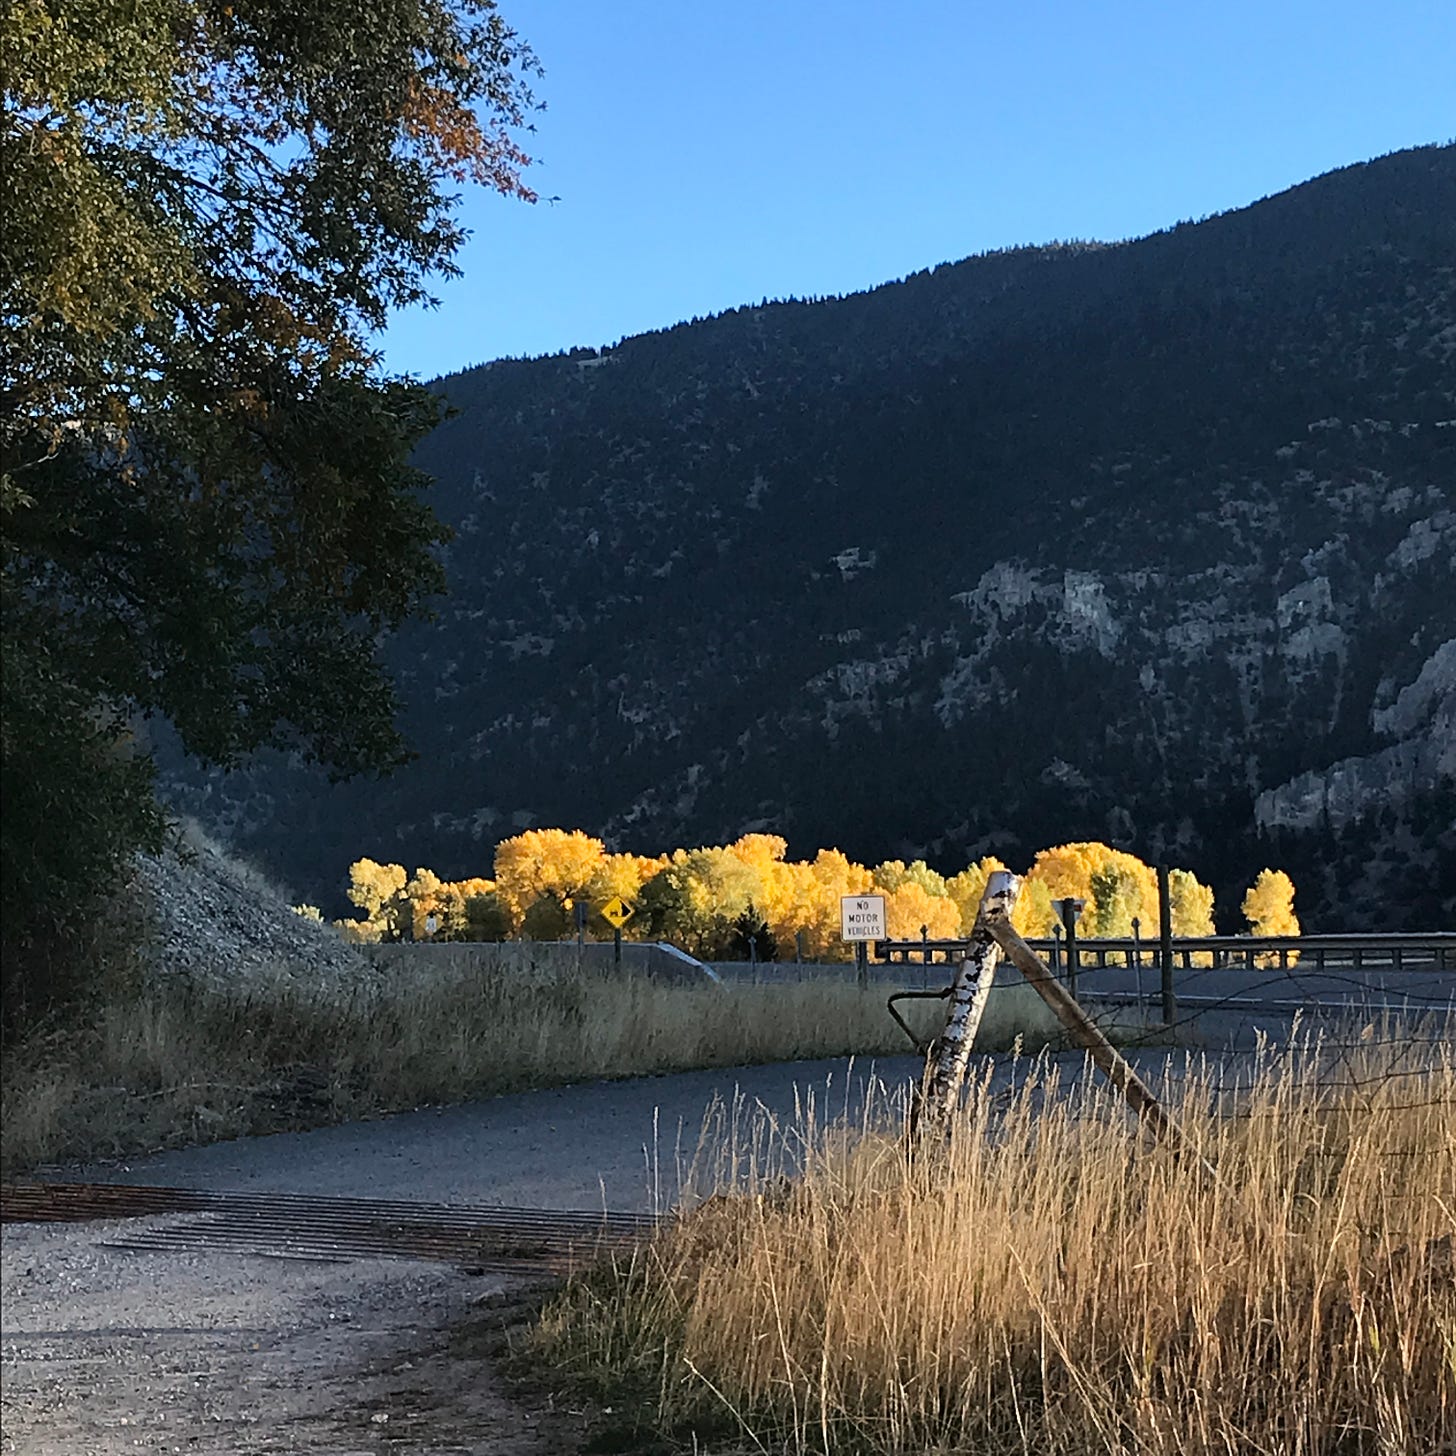 Row of golden cottonwood trees shot with sunlight against a dark mountainside, blue sky above.